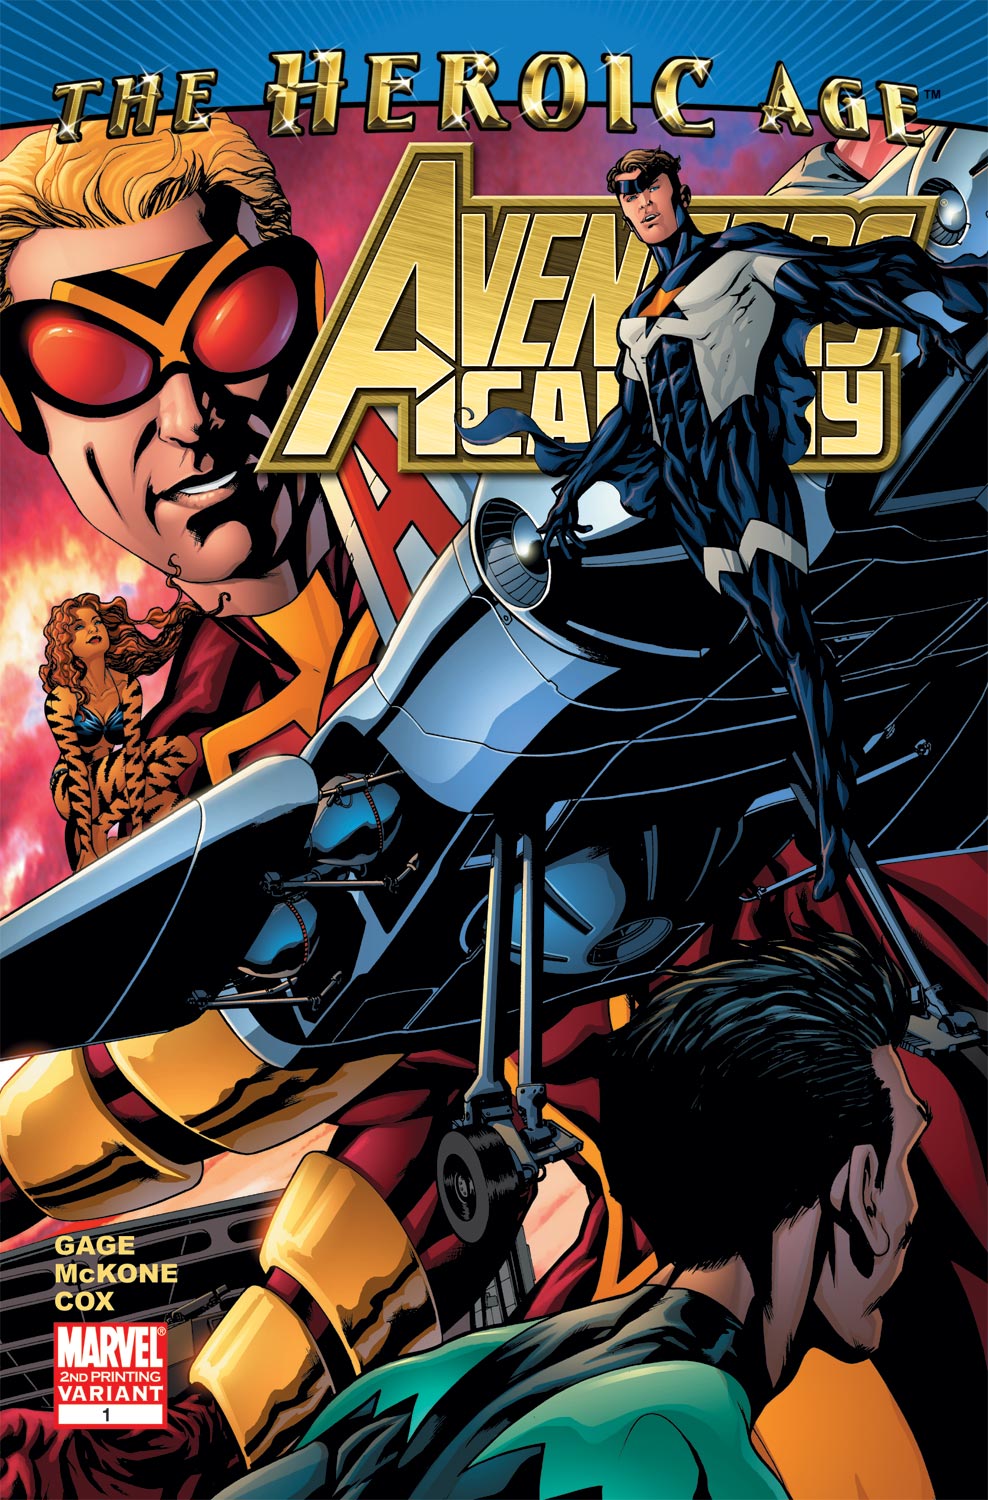 Avengers Academy (2010) #1 (2ND PRINTING VARIANT)